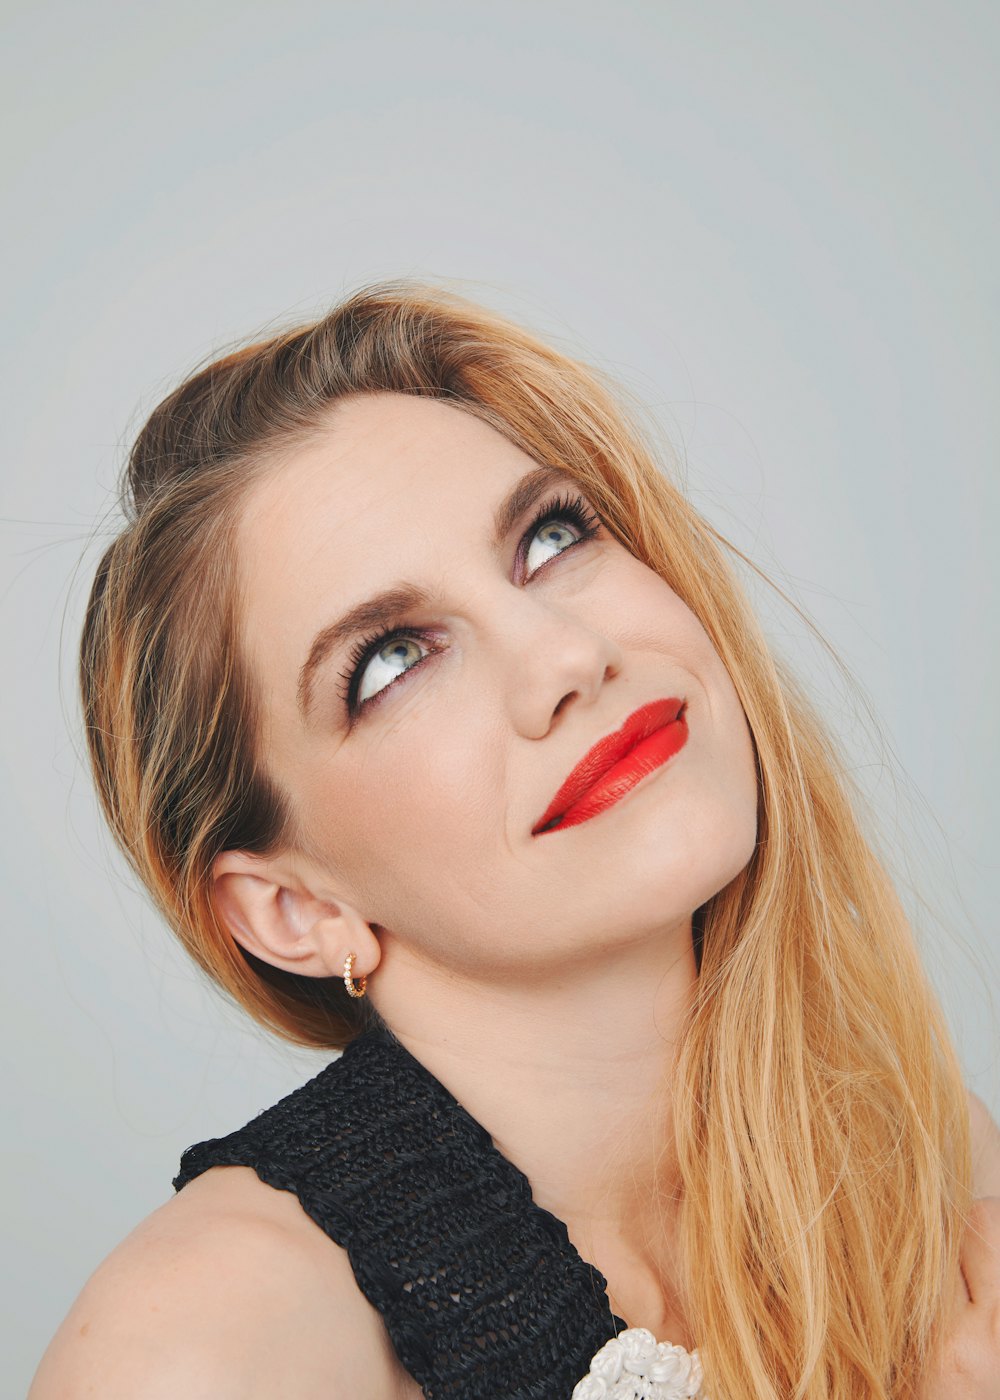 How Veep Star Anna Chlumsky Became An Unlikely Comedy Hero